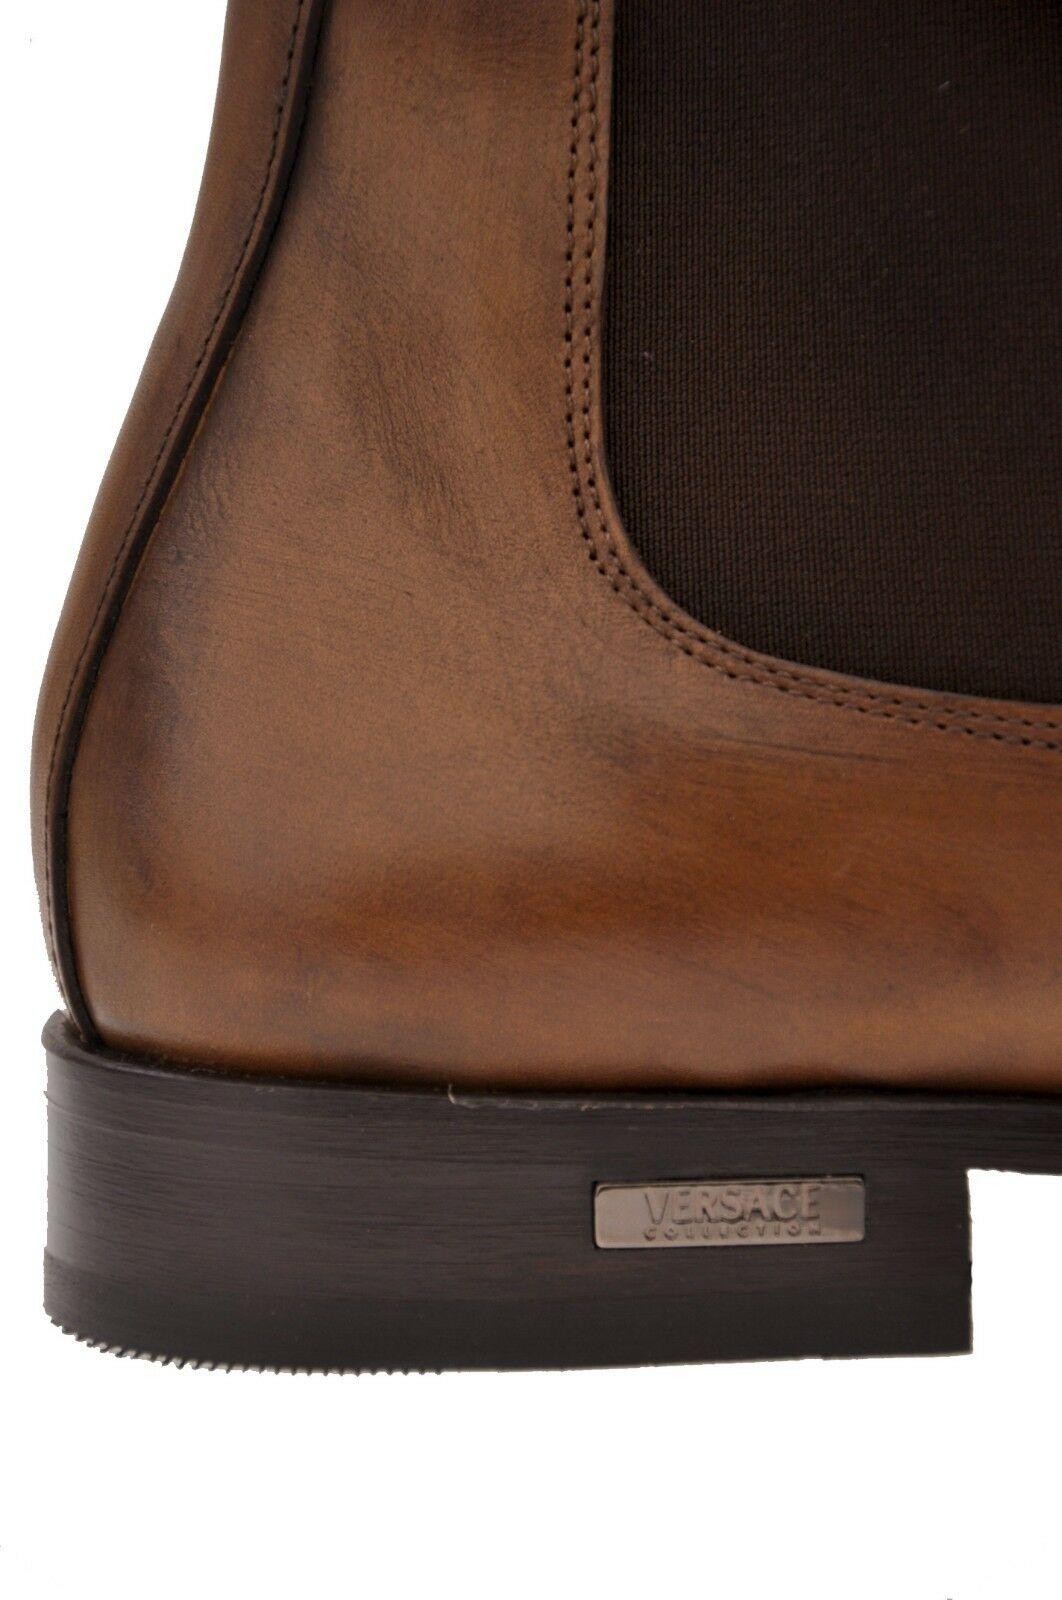 Men's VERSACE COLLECTION BROWN LEATHER Boots 40 - 7; 42 - 9